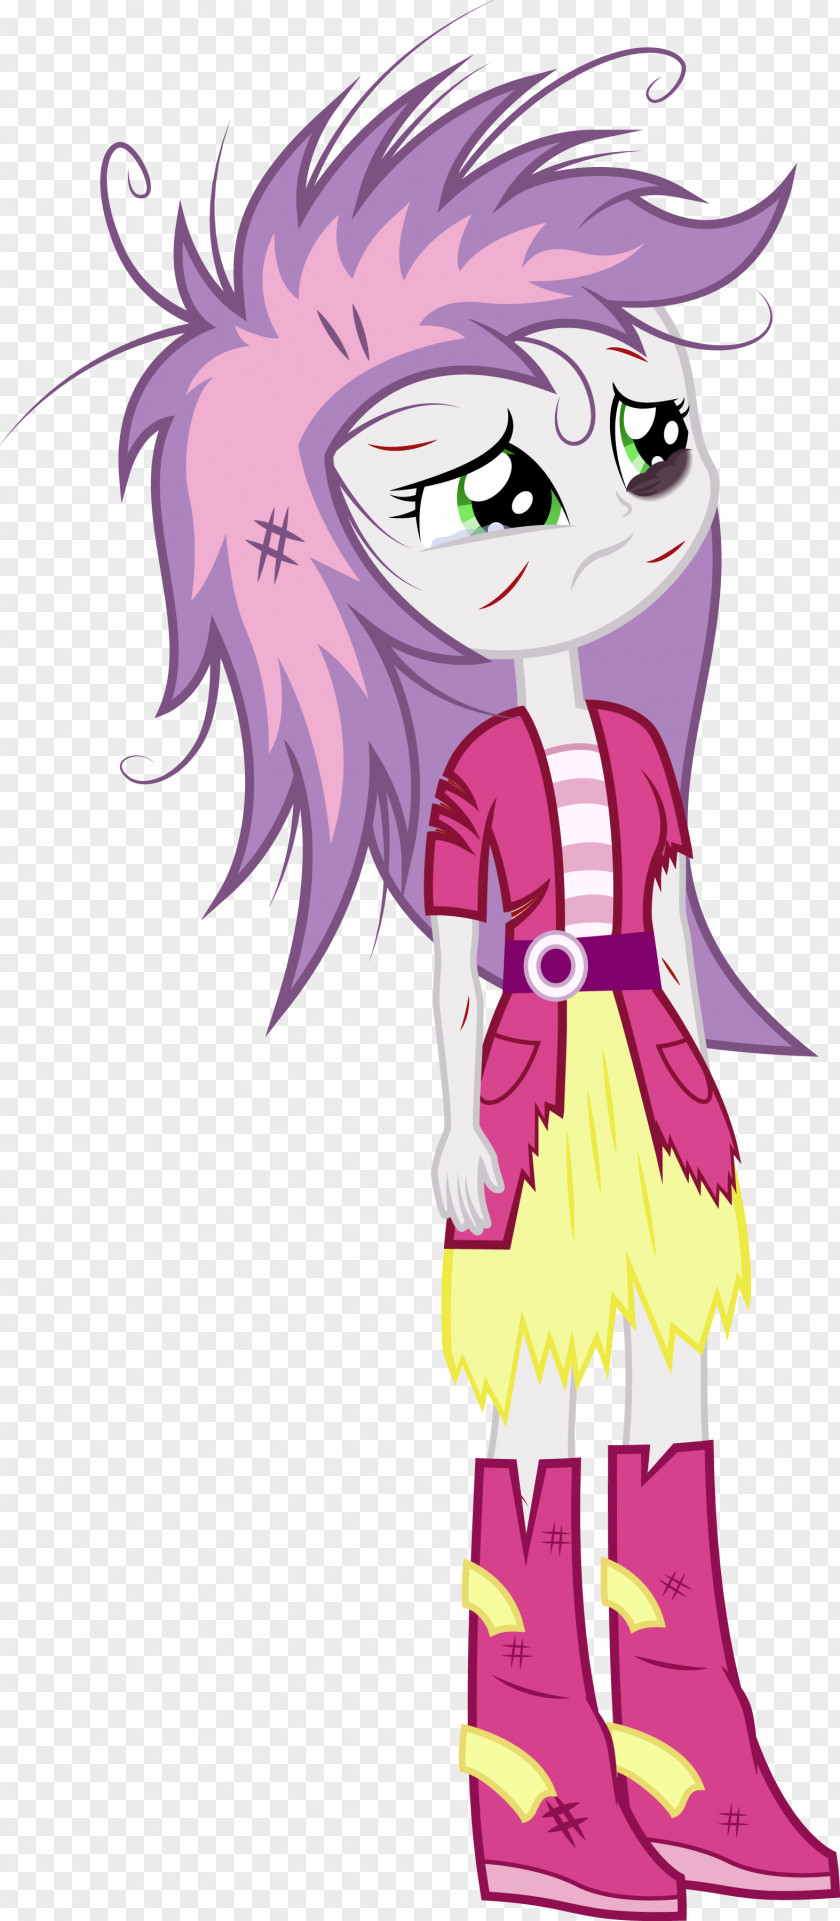 Messy Hair Sweetie Belle Rarity Pinkie Pie Scootaloo My Little Pony: Equestria Girls PNG